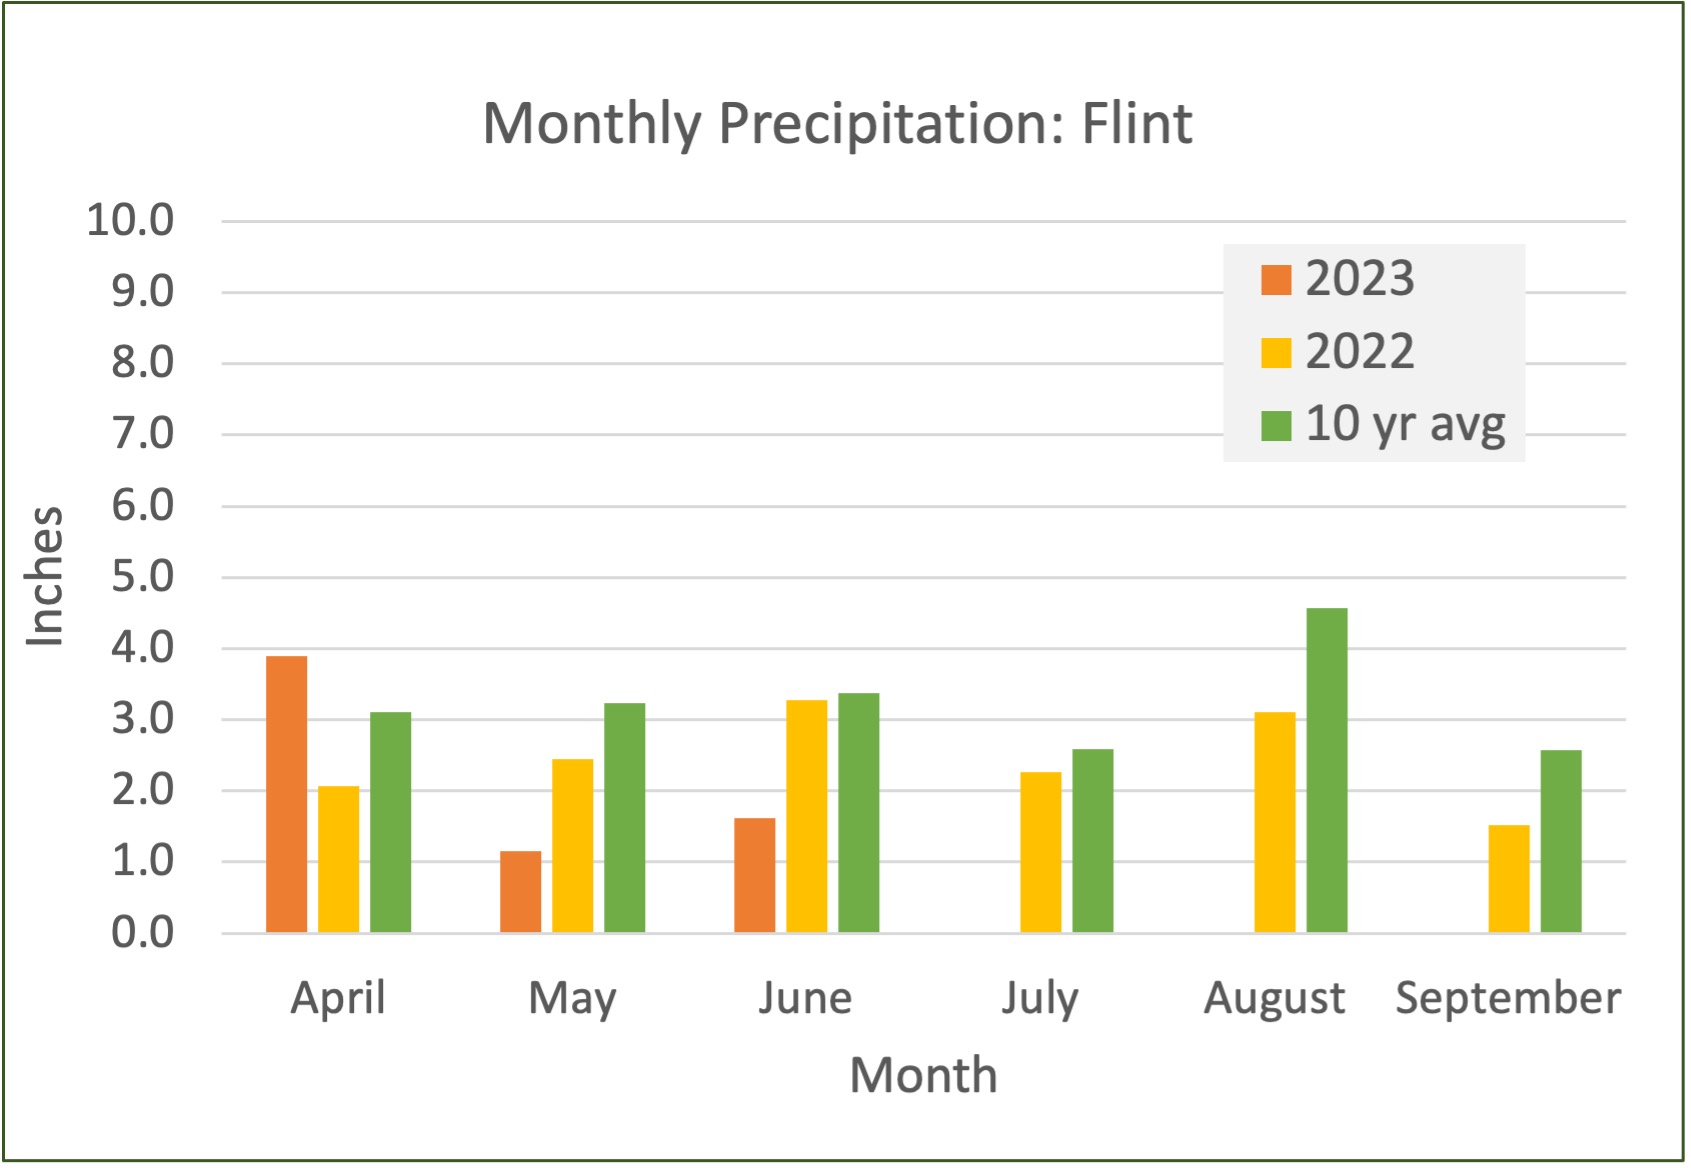 Precipitation graph by month showing April, May, June 2023 compared to 2022 and long term average.